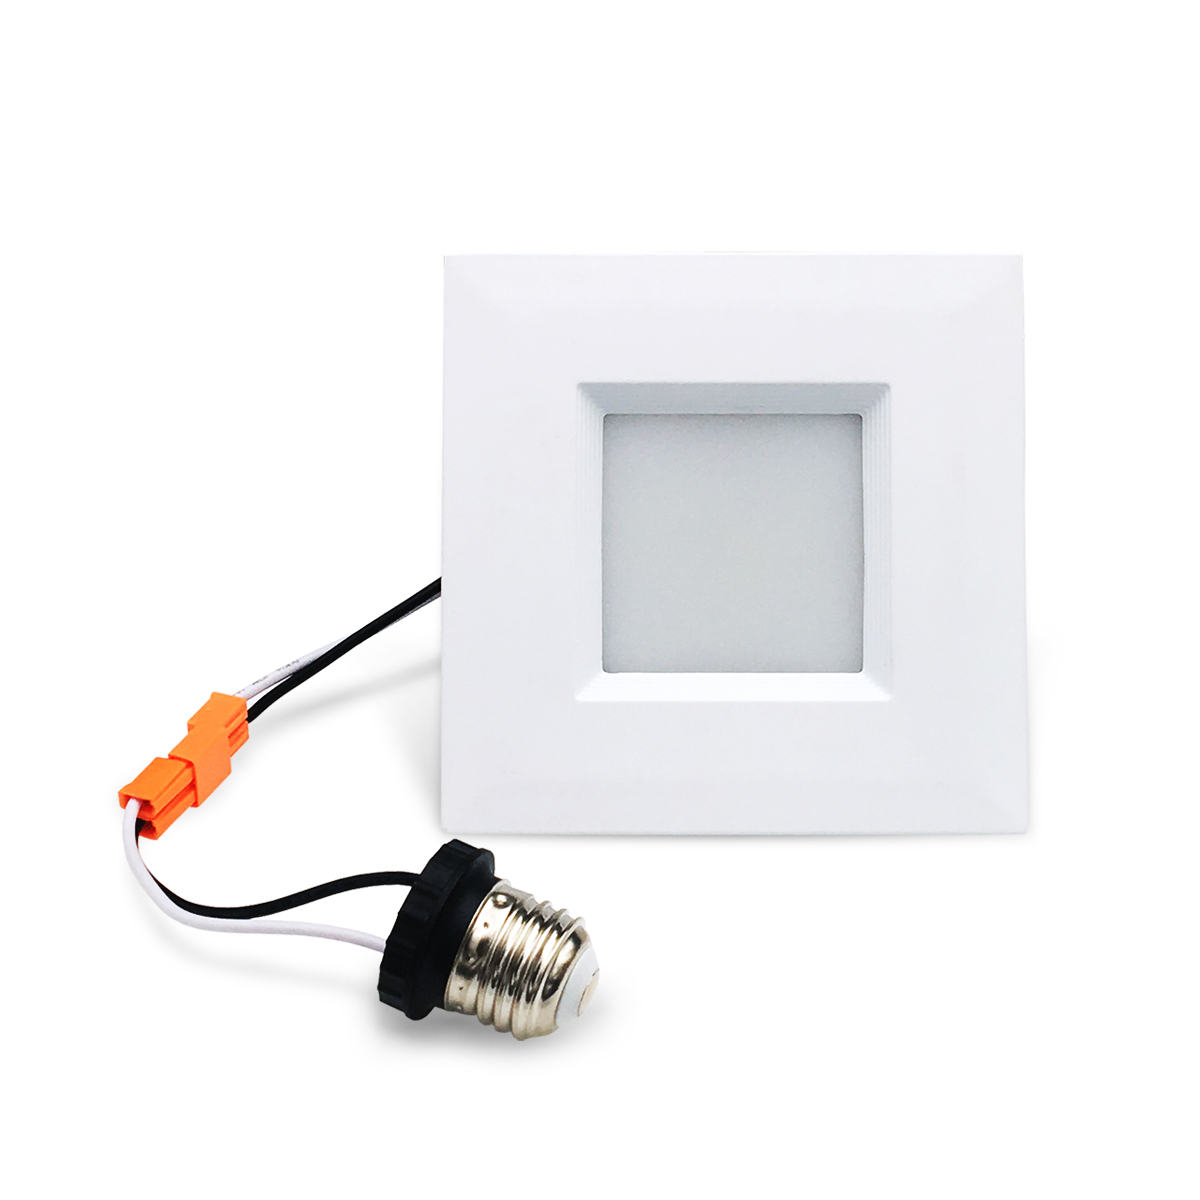 Homestar 4inch 8W Square Retrofit Downlight with ETL and ES Certification